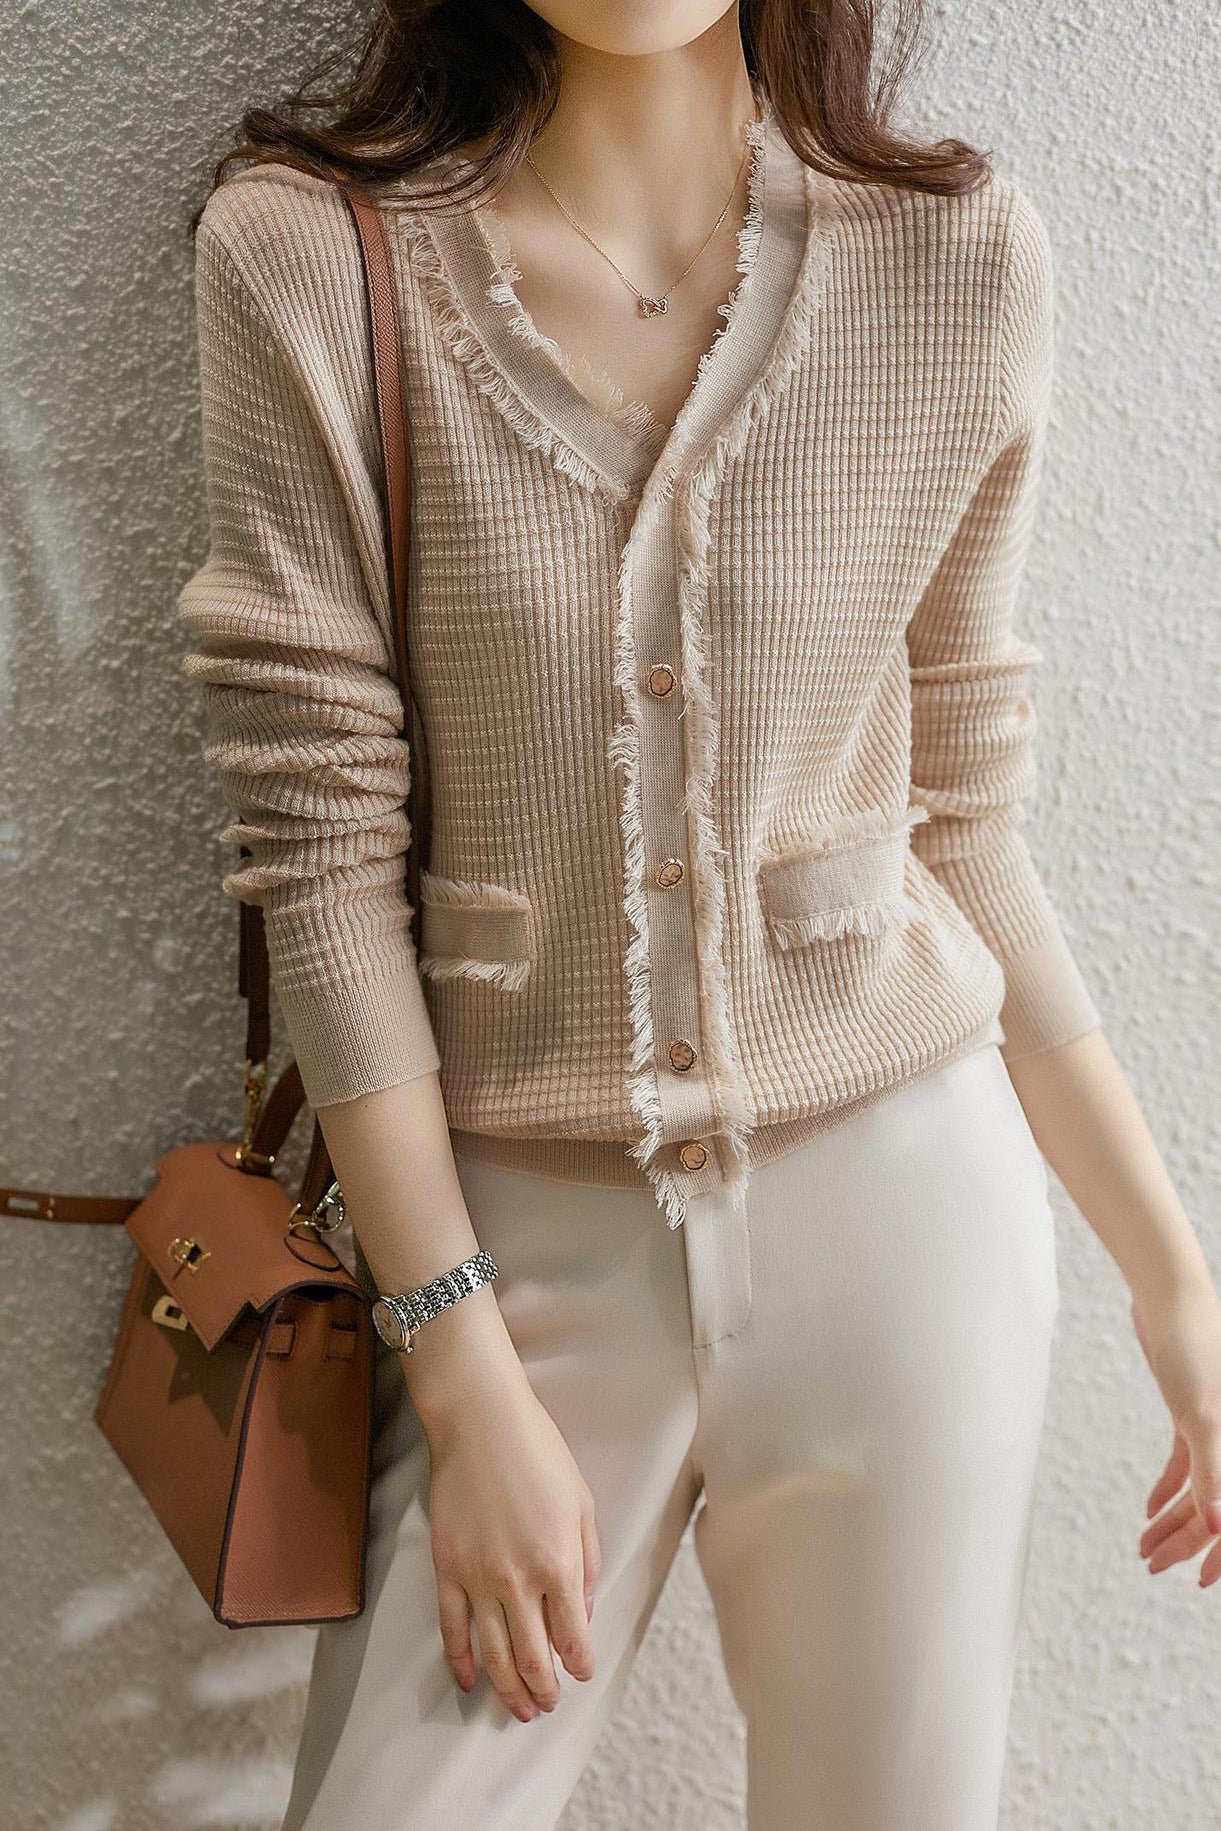 Chanel-style fringe knit tops in 2 colors